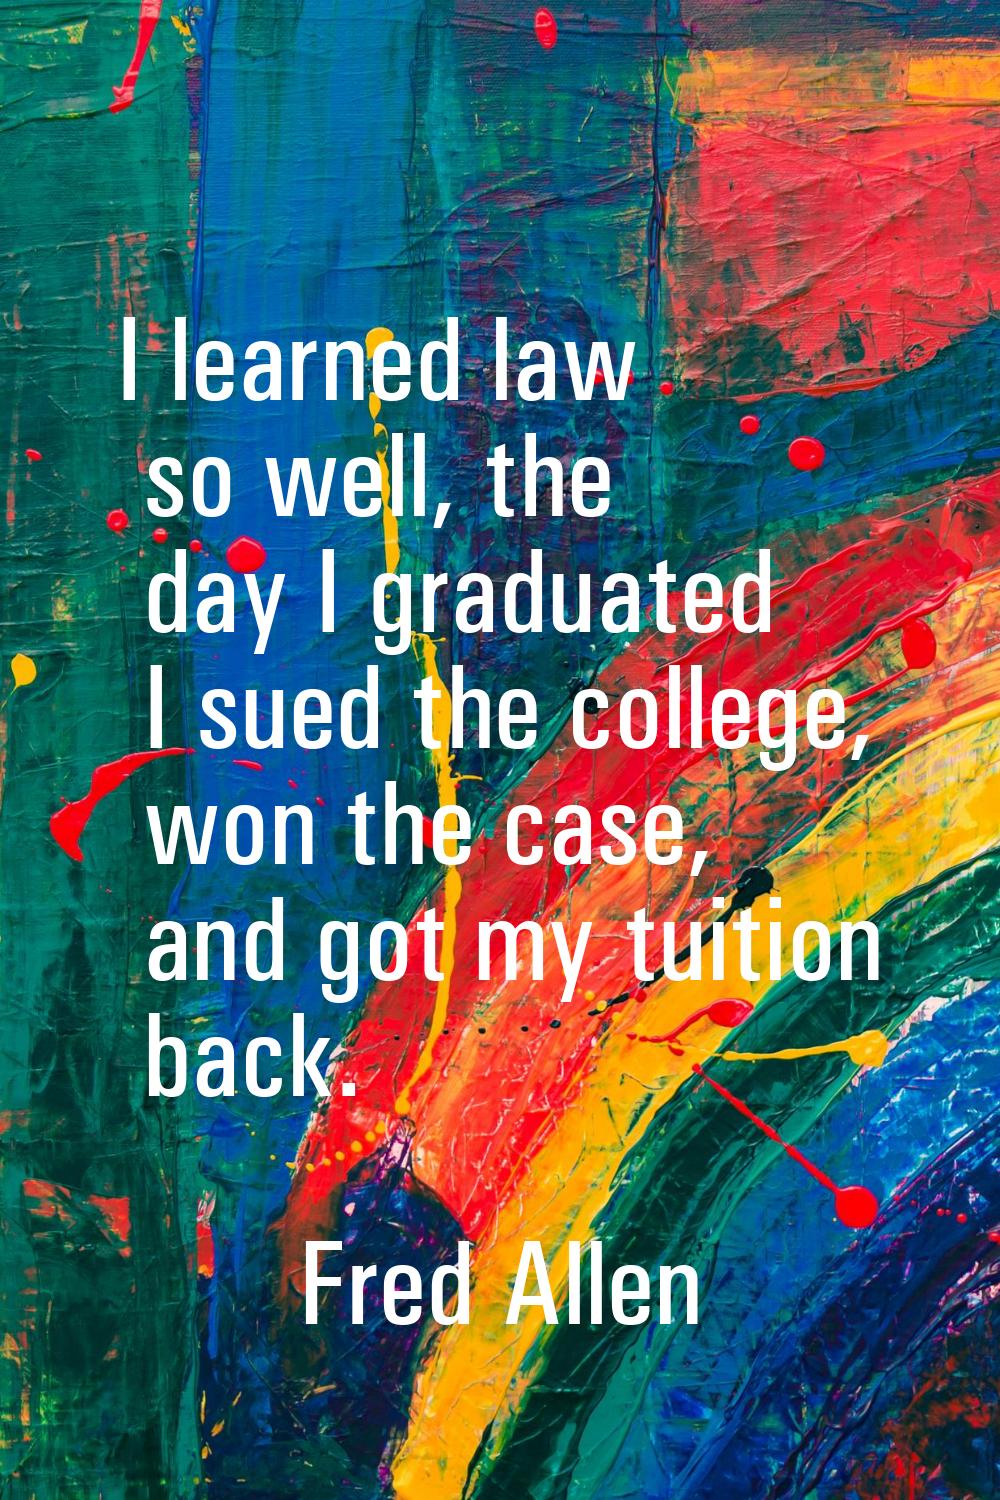 I learned law so well, the day I graduated I sued the college, won the case, and got my tuition bac